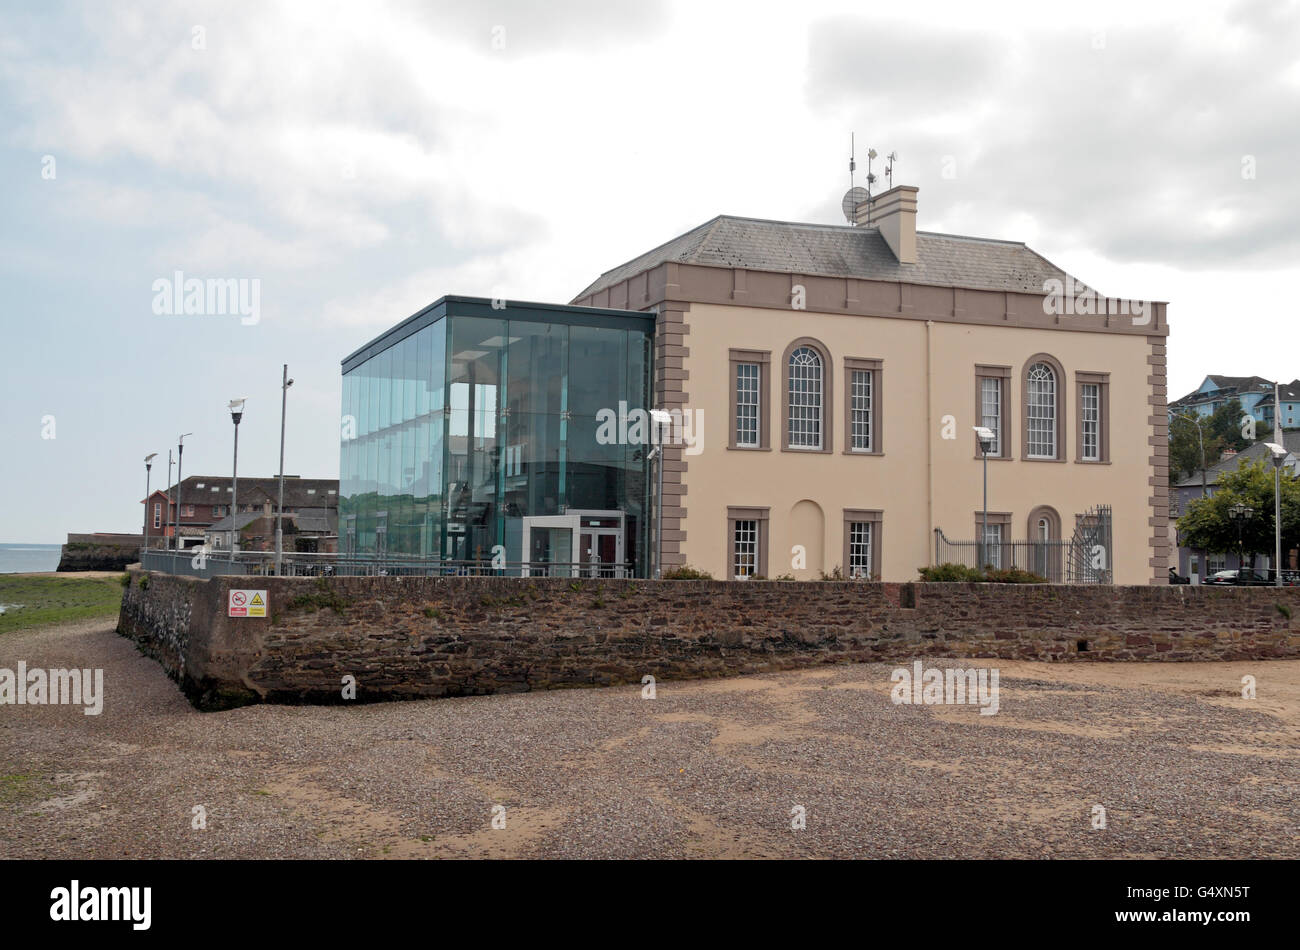 The town hall in Youghal, Co. Cork, Ireland (Eire). Stock Photo